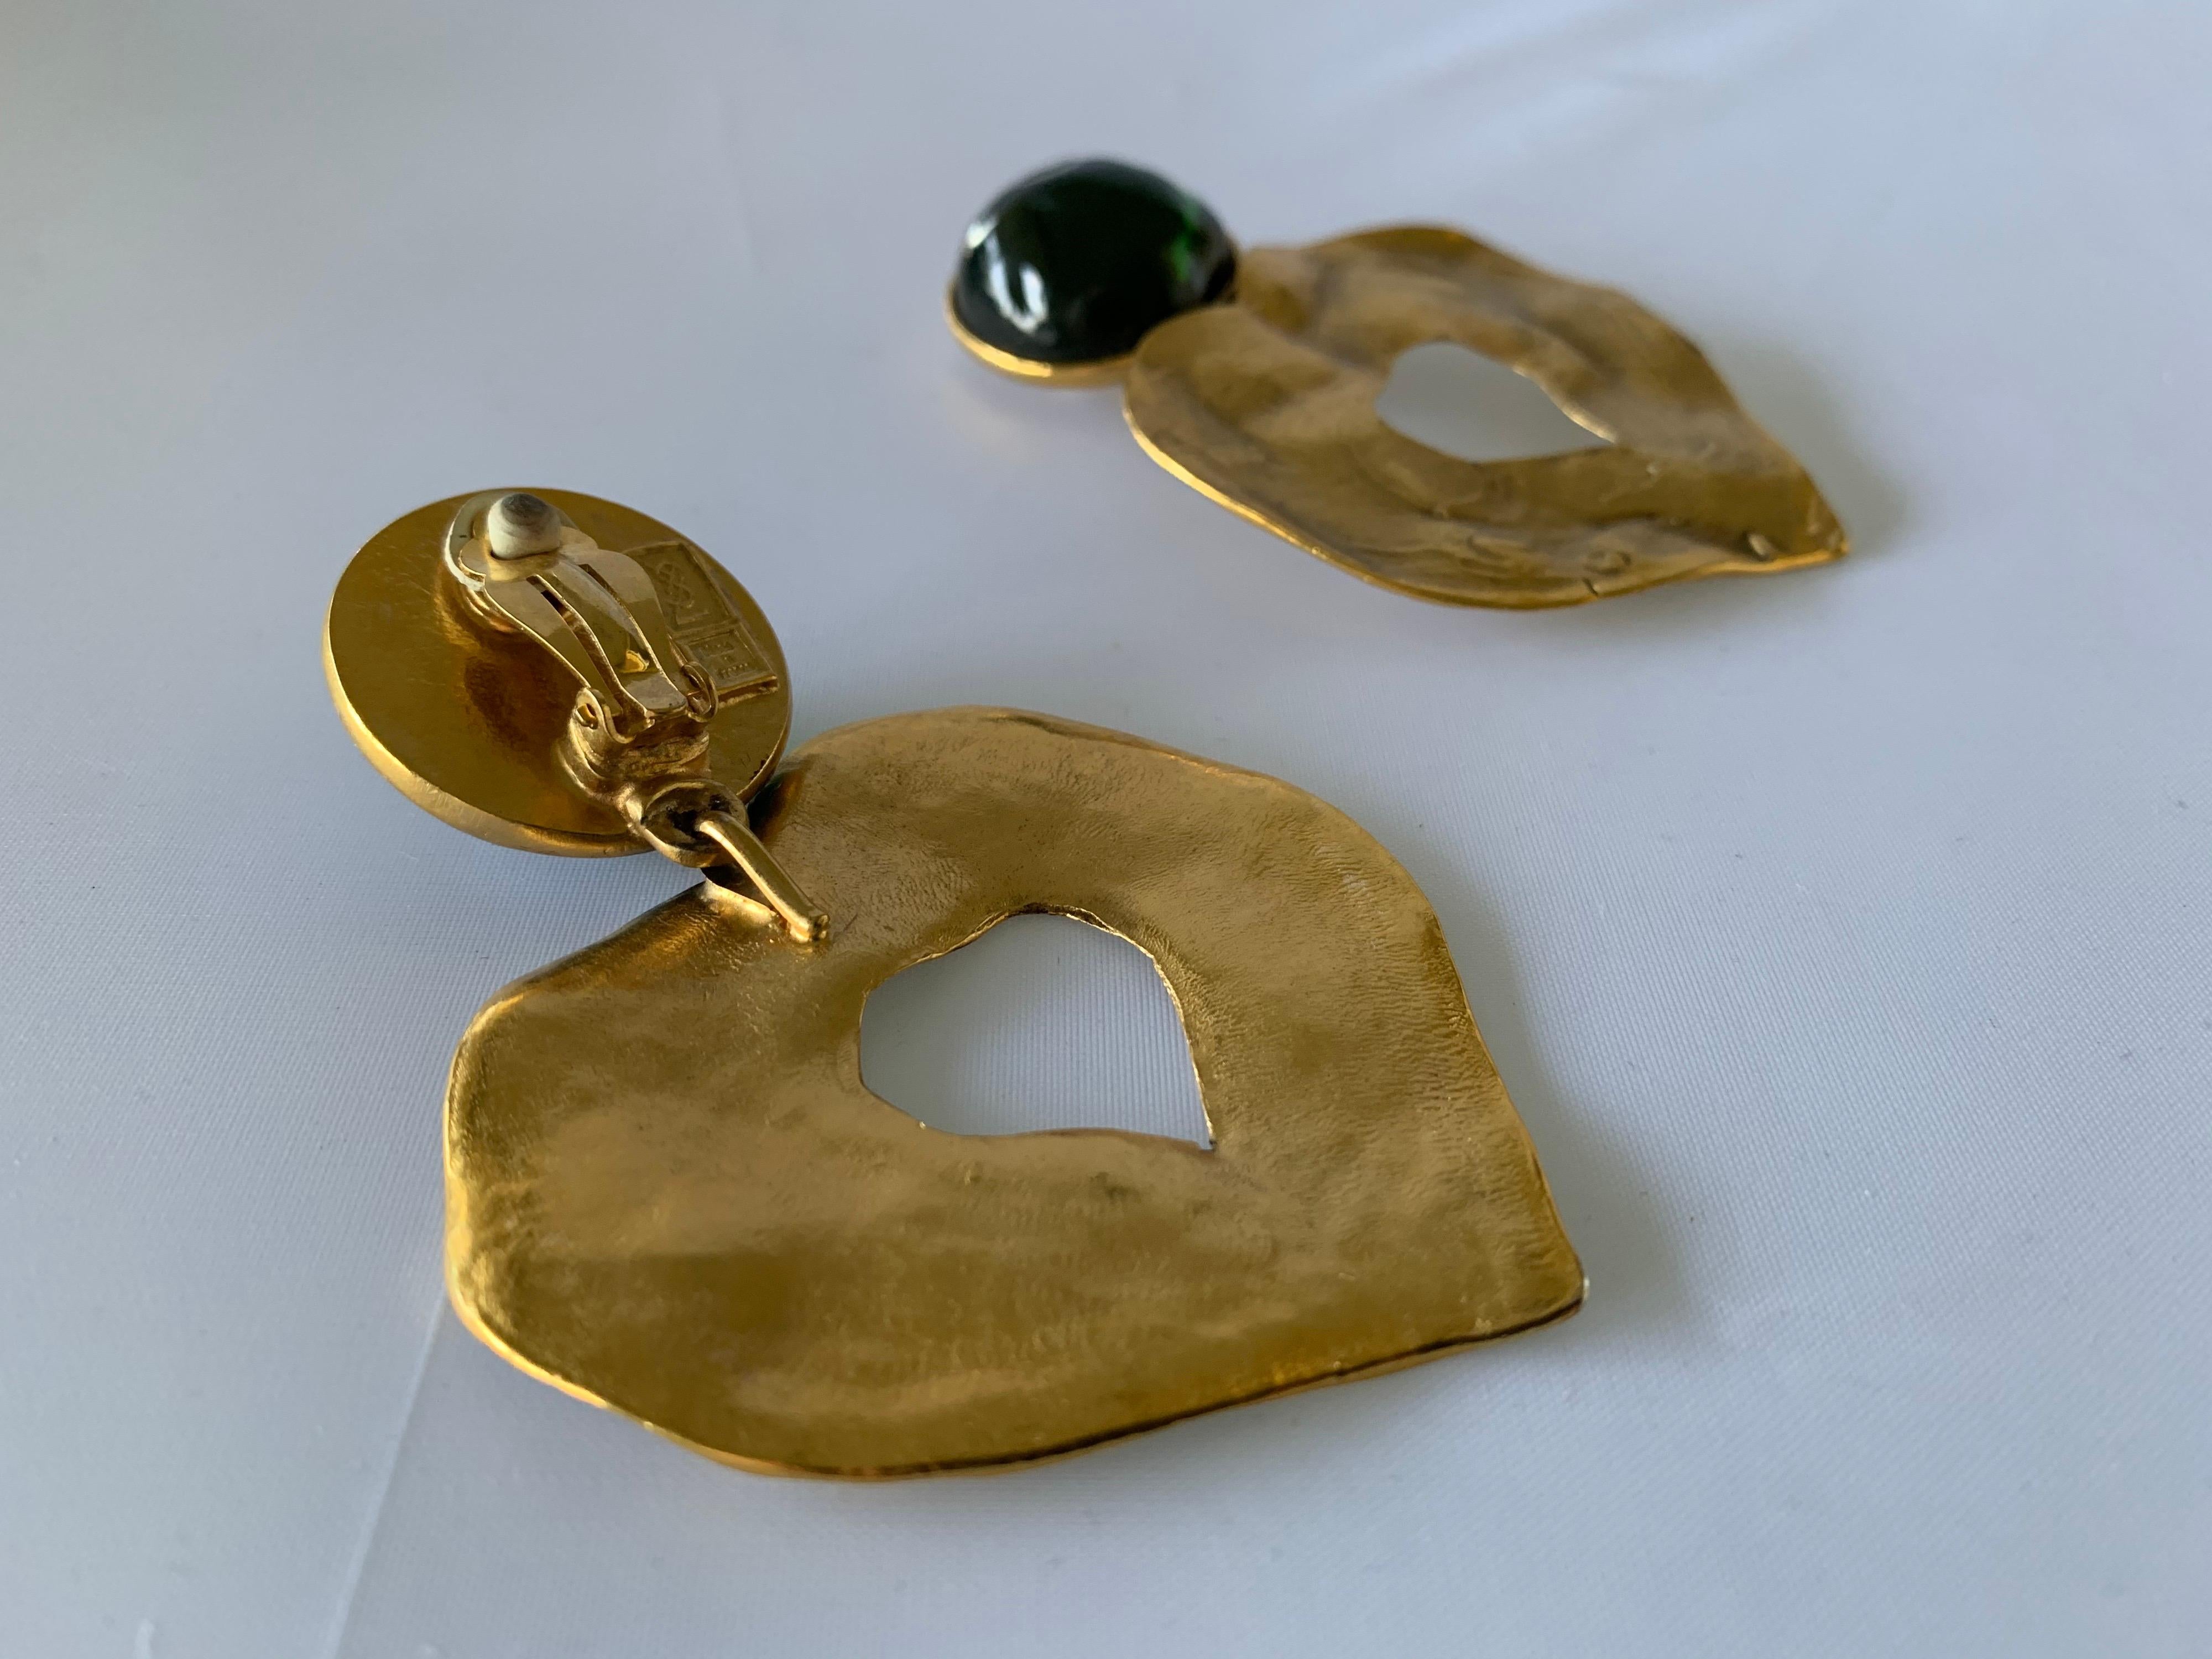 Contemporary Vintage Yves Saint Laurent Green and Gold Heart Statement Earrings 